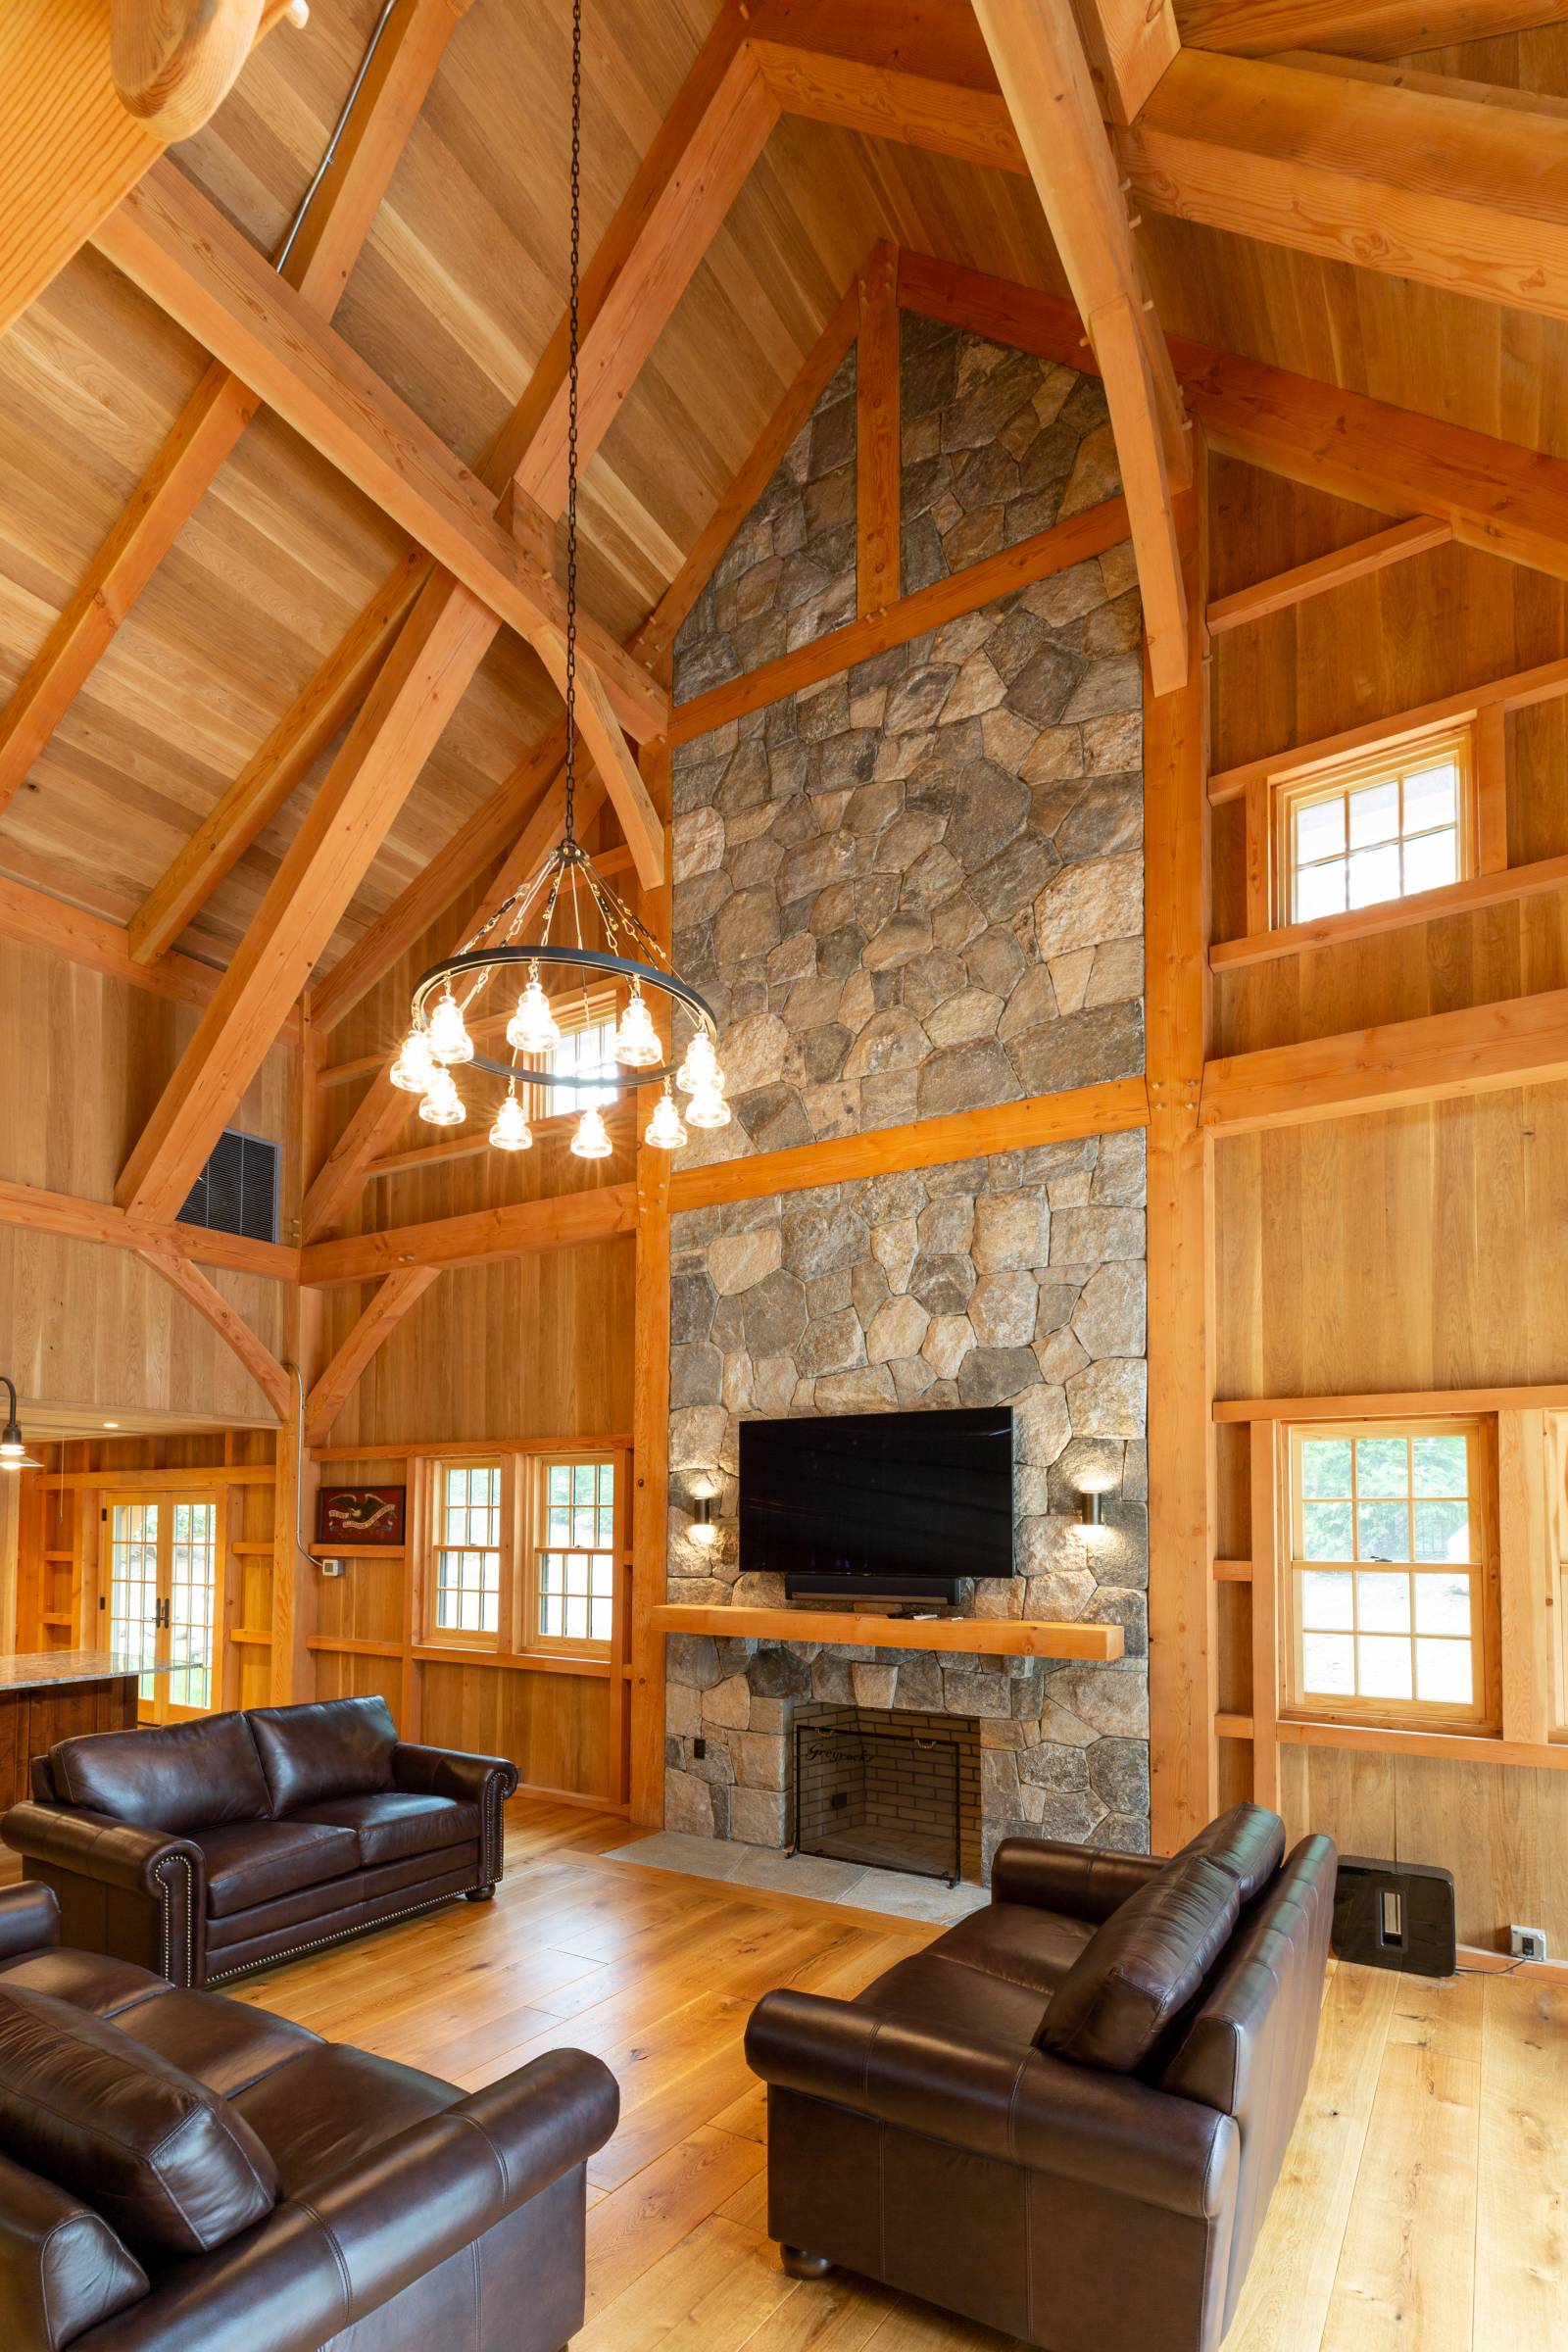 Floor-to-Ceiling Stone Fireplace set into the Timber Frame